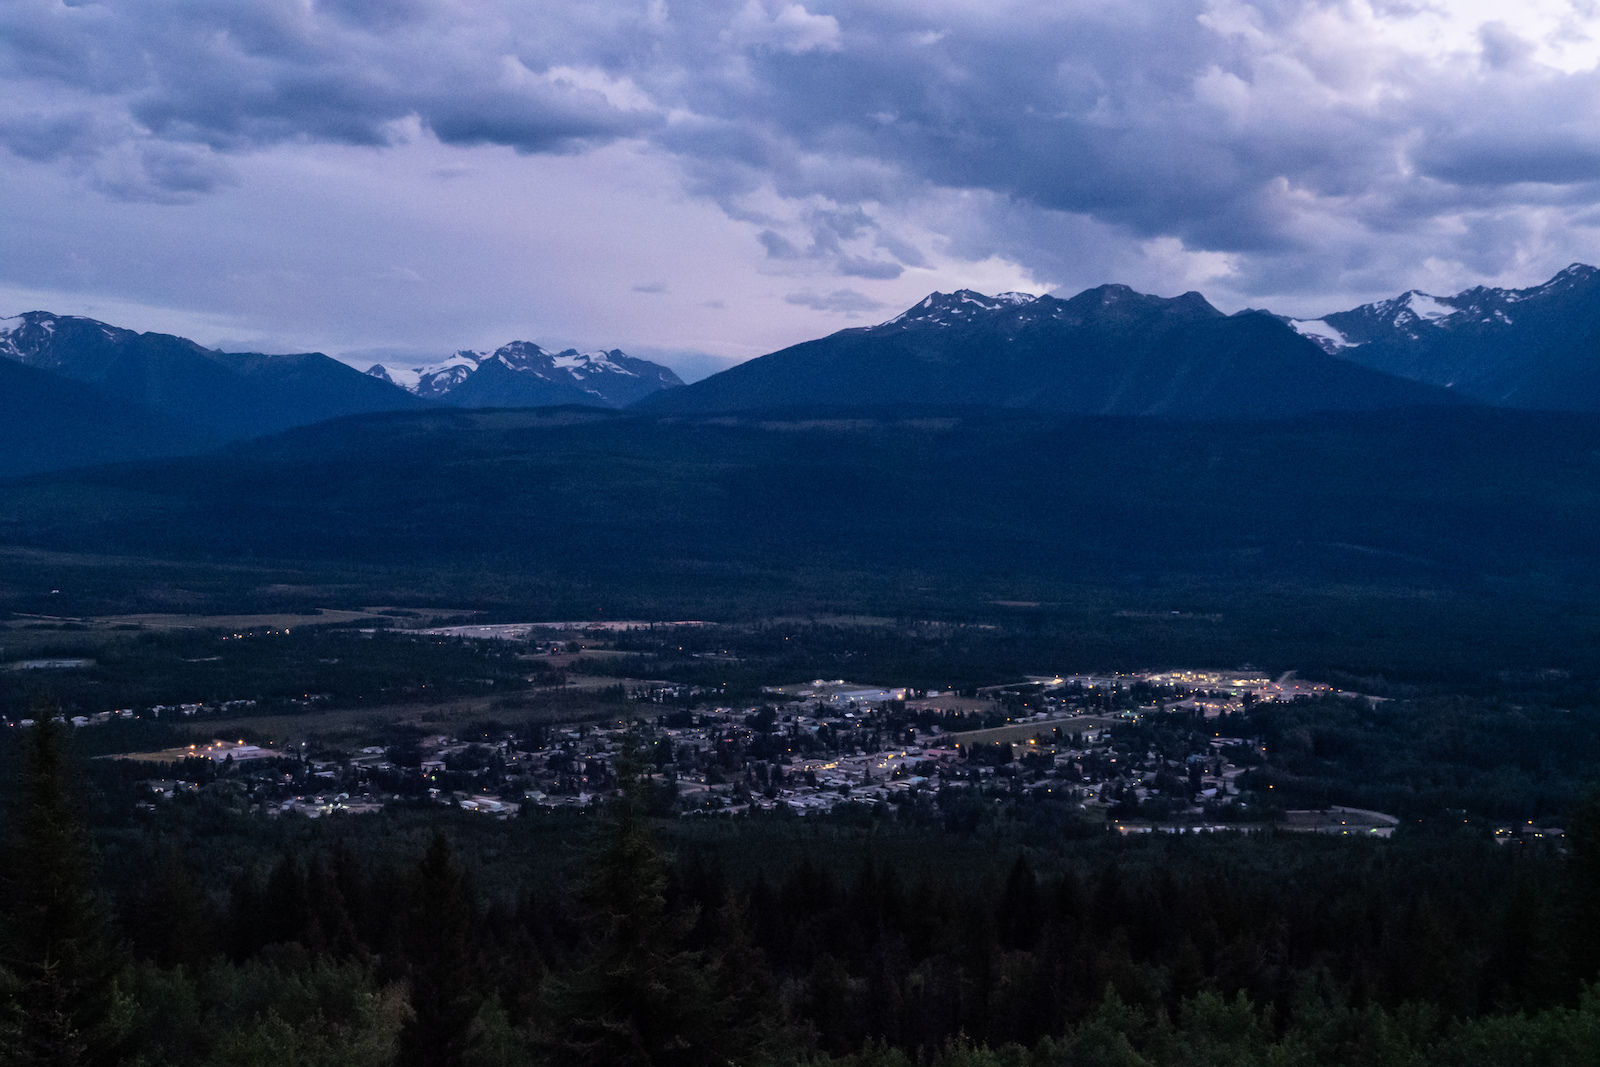 Valemount sits at the junction of the Caribou Monashee and Rocky Mountain Ranges